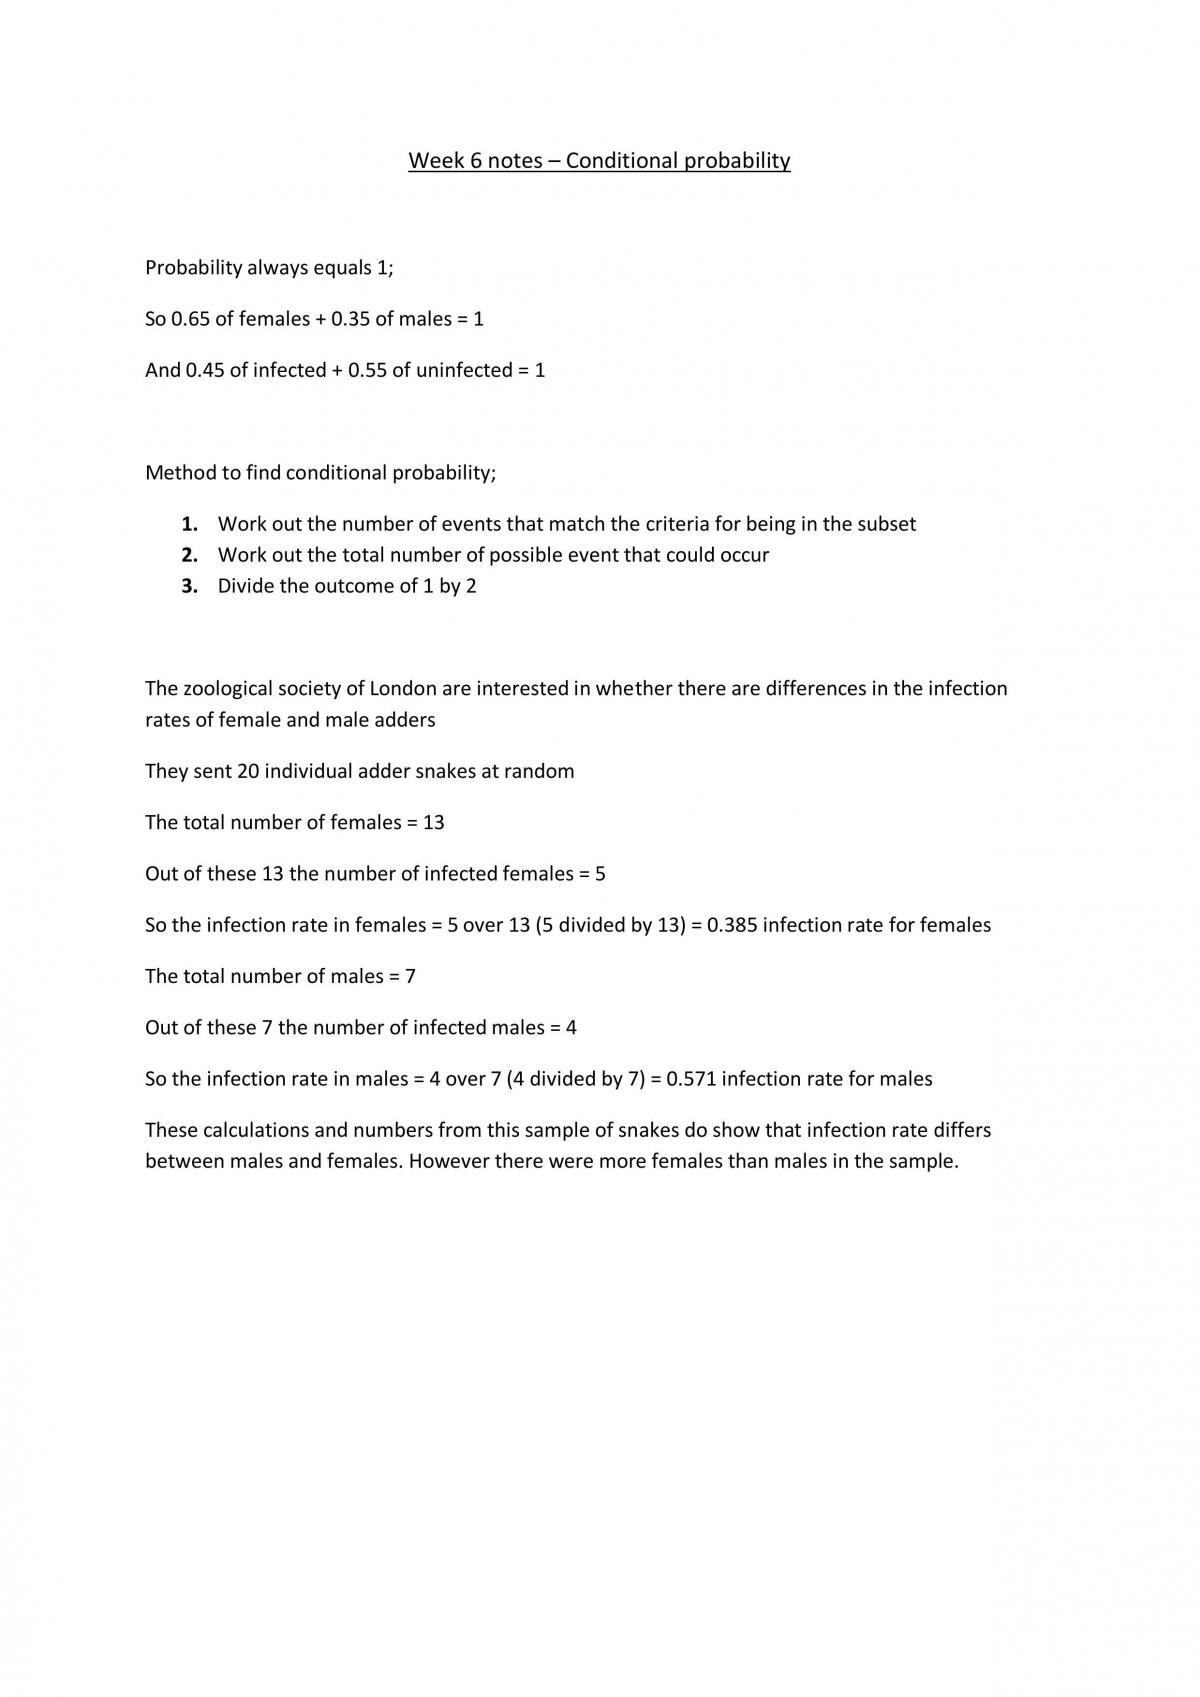 Complete study notes for Research methods - Page 31